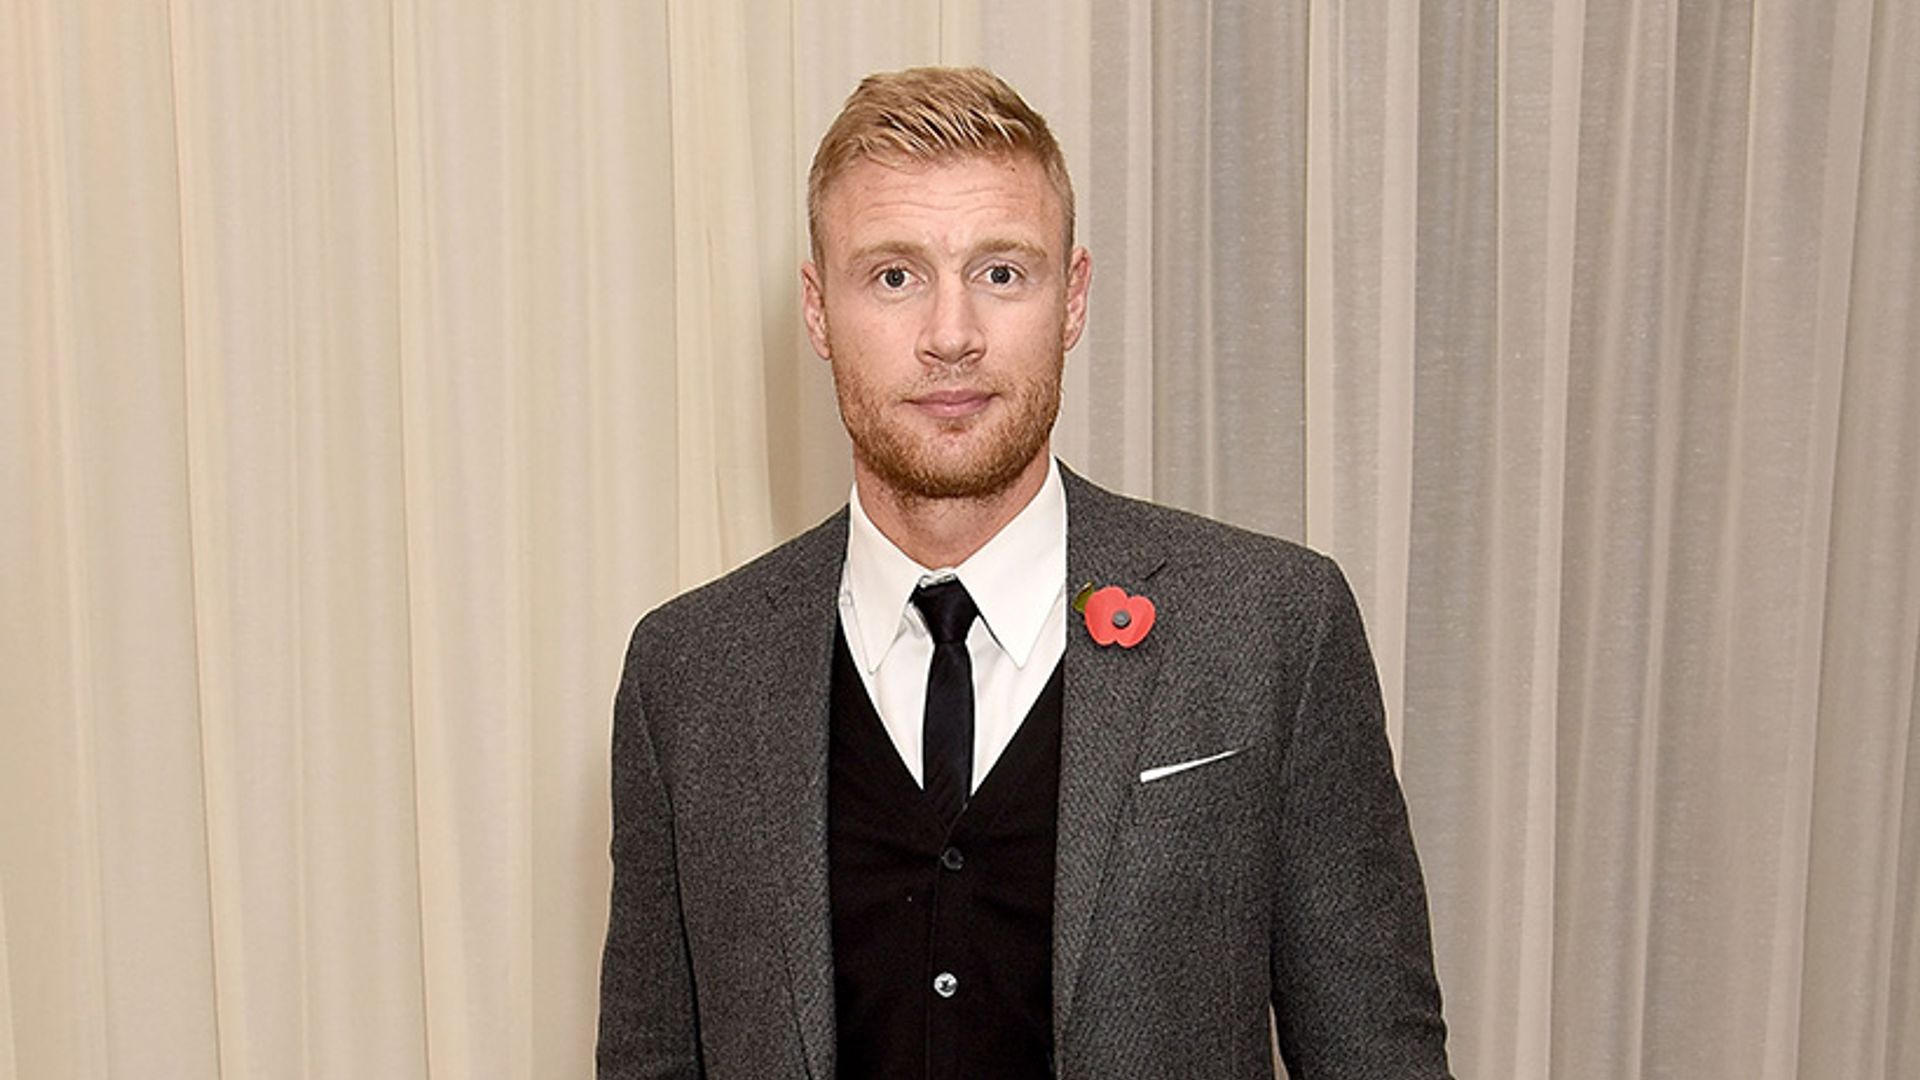 Freddie Flintoff opens up about struggle with depression: 'Men in particular can find it difficult'